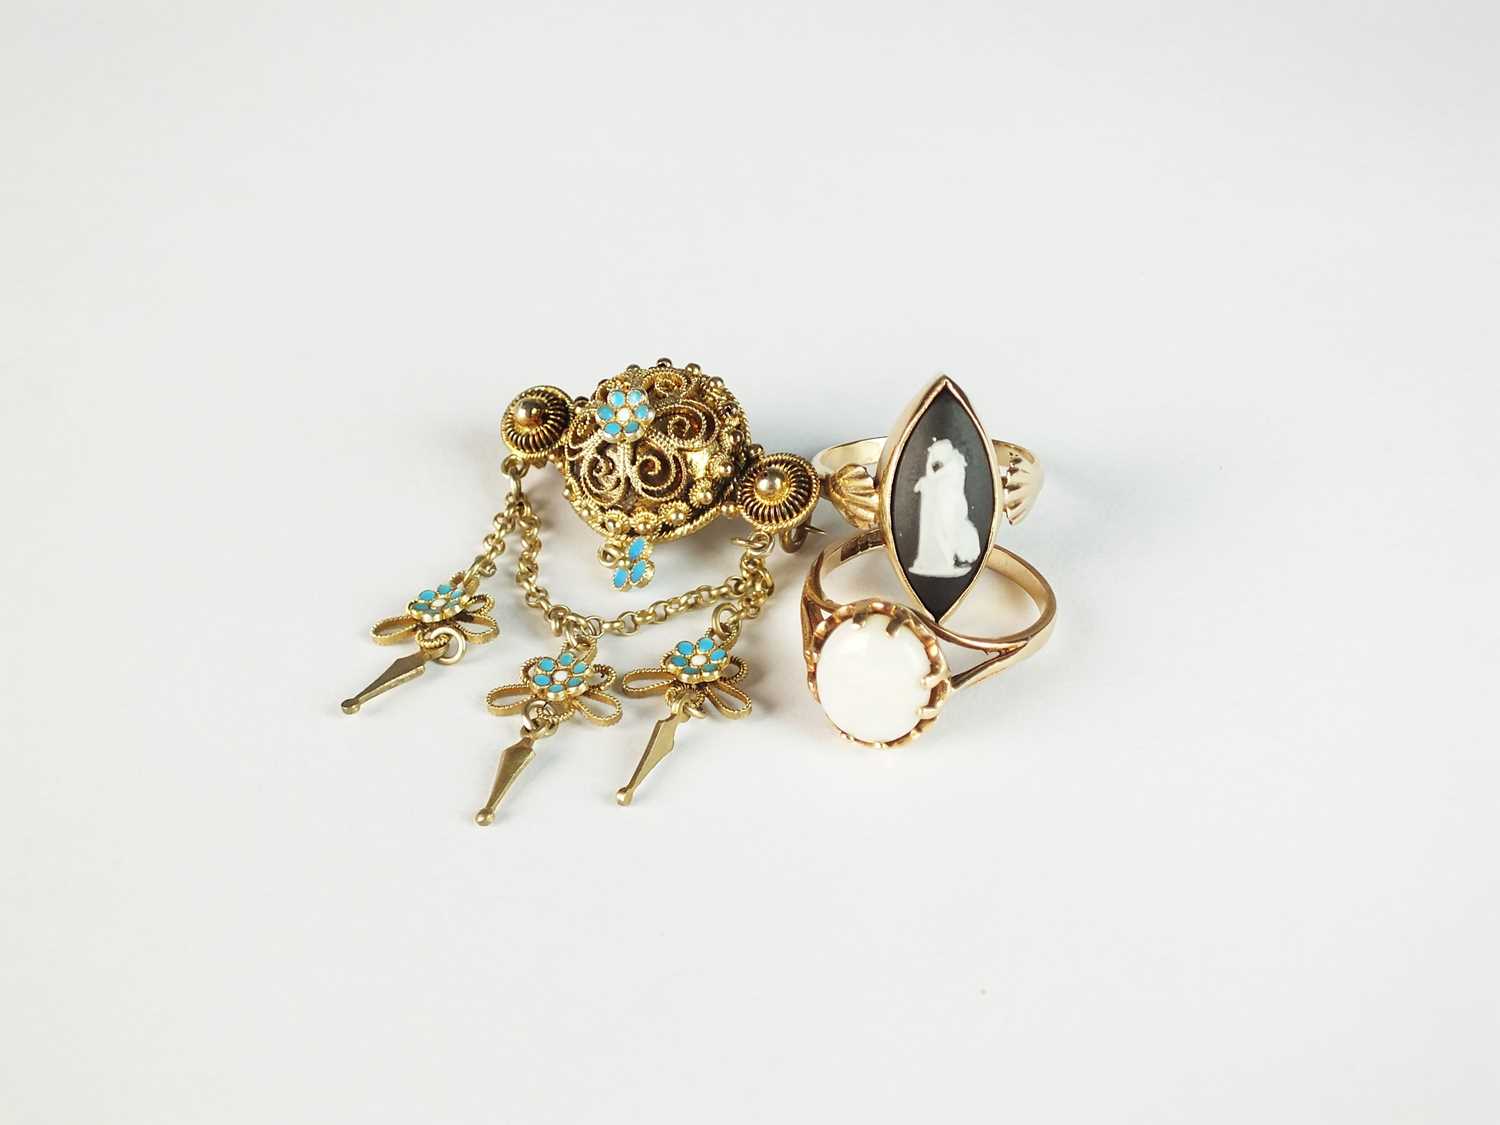 Two rings and a brooch